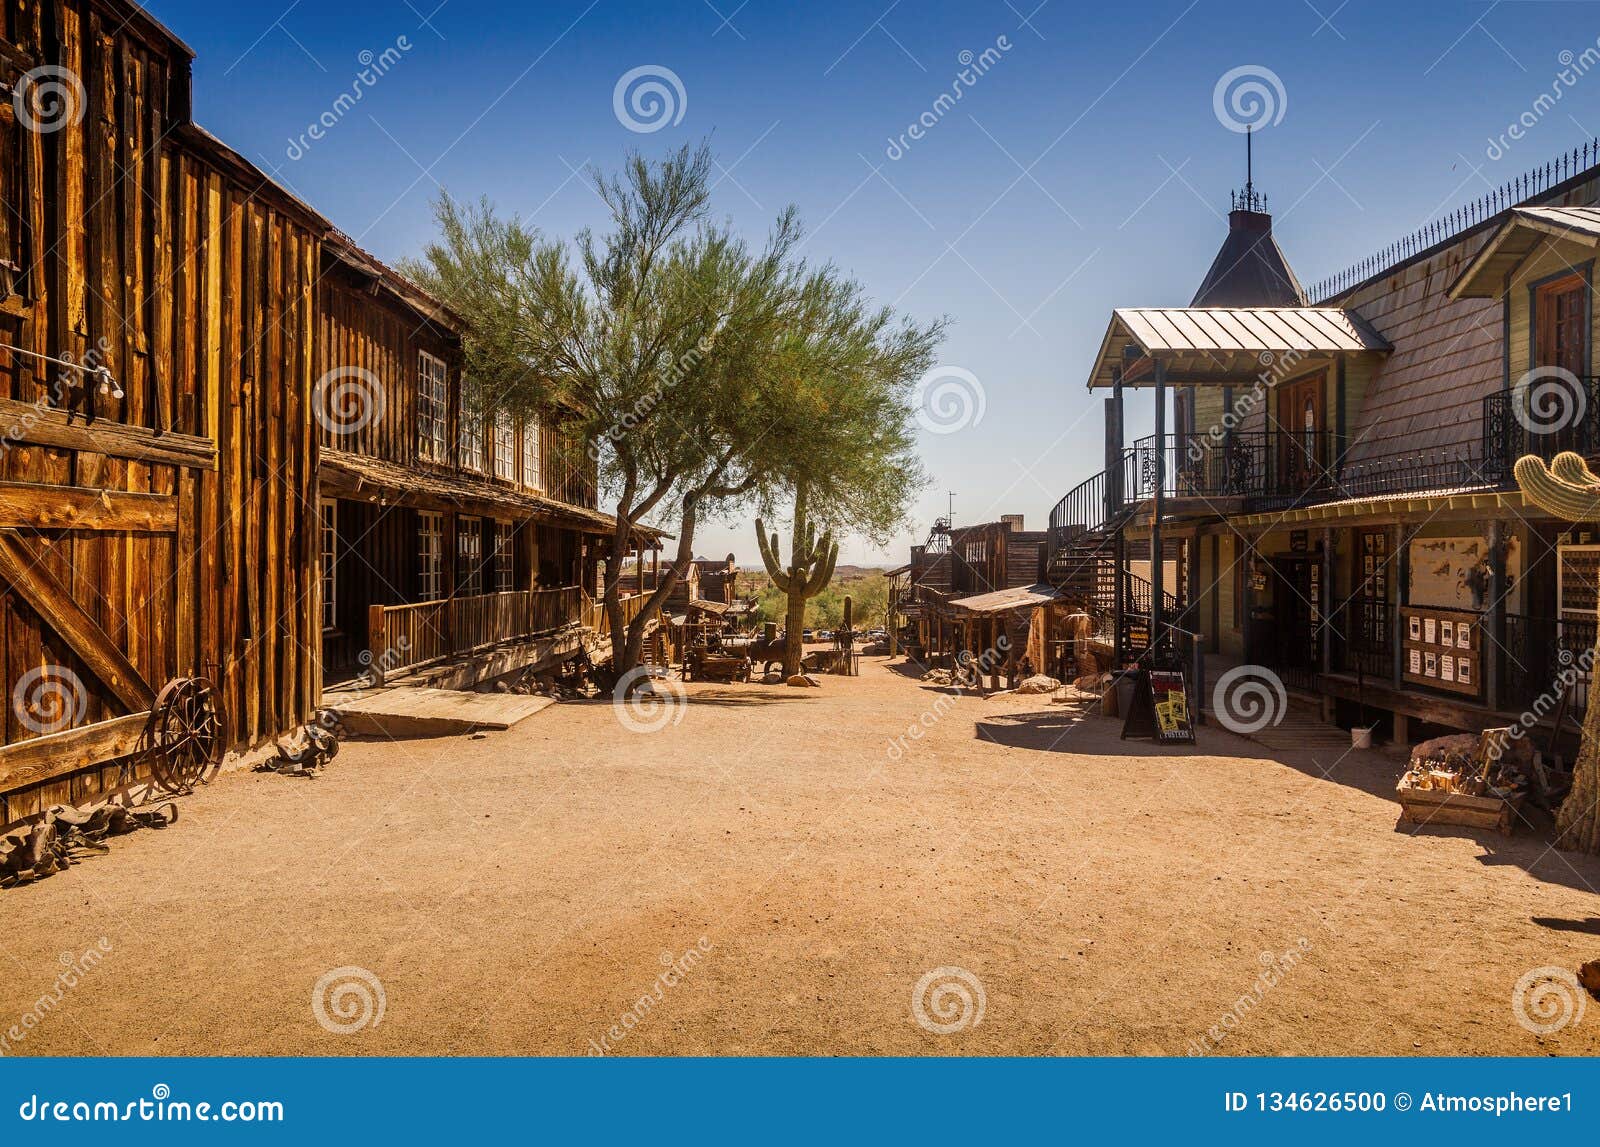 old western goldfield ghost town square with huge cactus and saloon, photo taken during the sunny day